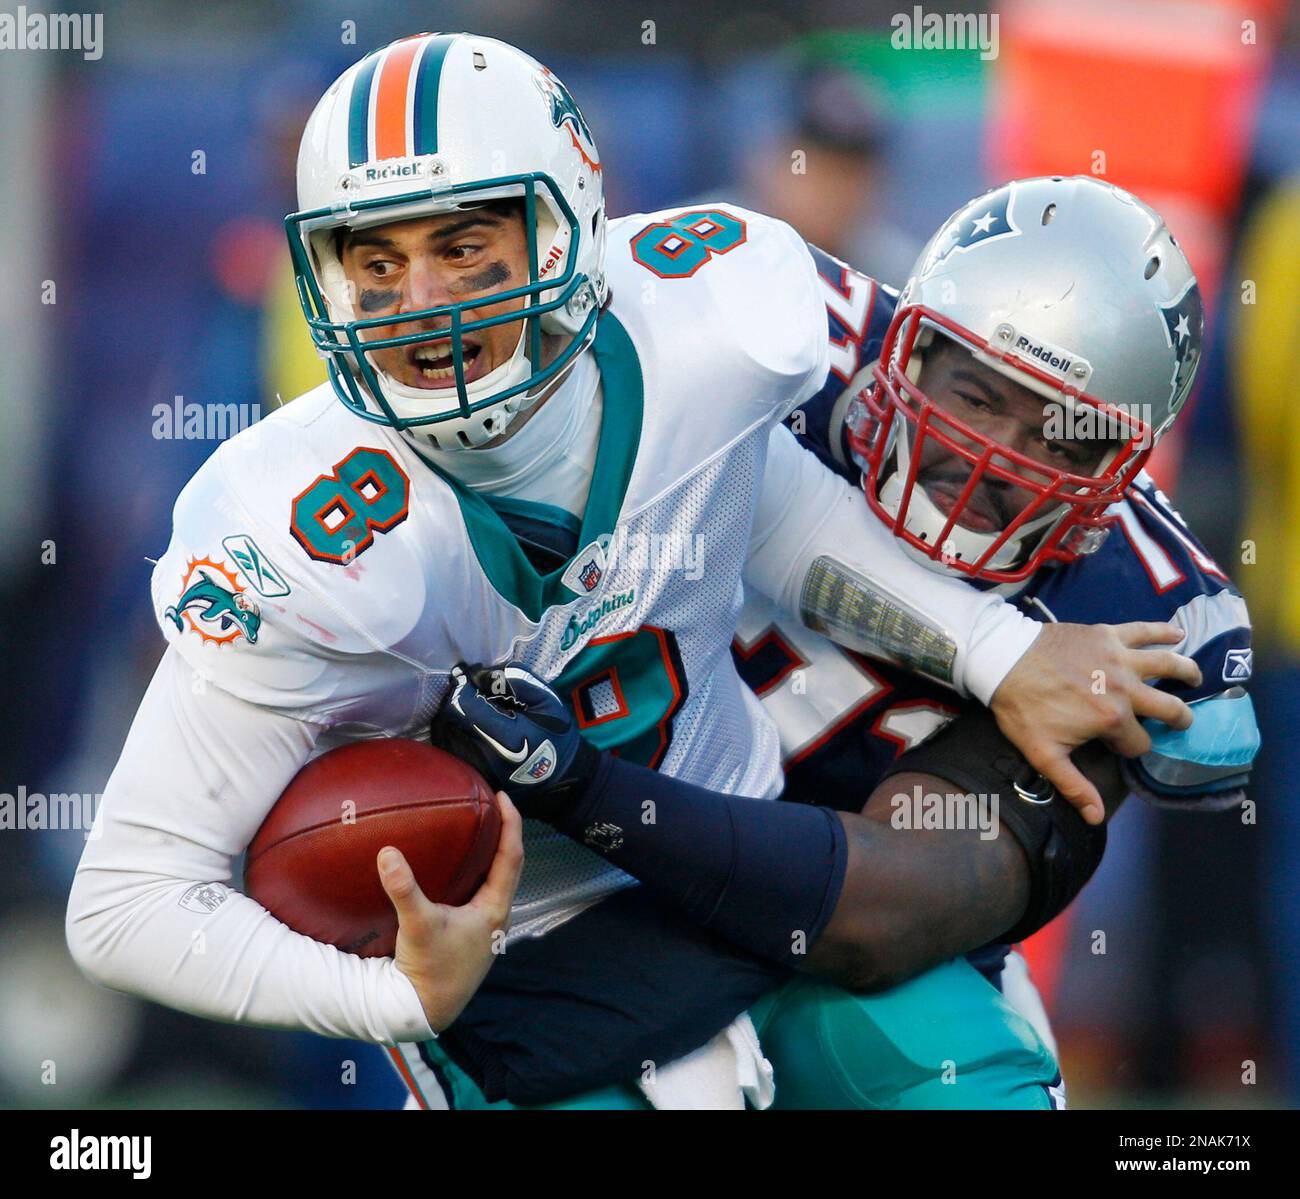 Miami Dolphins quarterback Matt Moore (8) is sacked by New England Patriots  defensive end Brandon Deaderick (71) during the third quarter of an NFL  football game at Gillette Stadium in Foxborough, Mass.